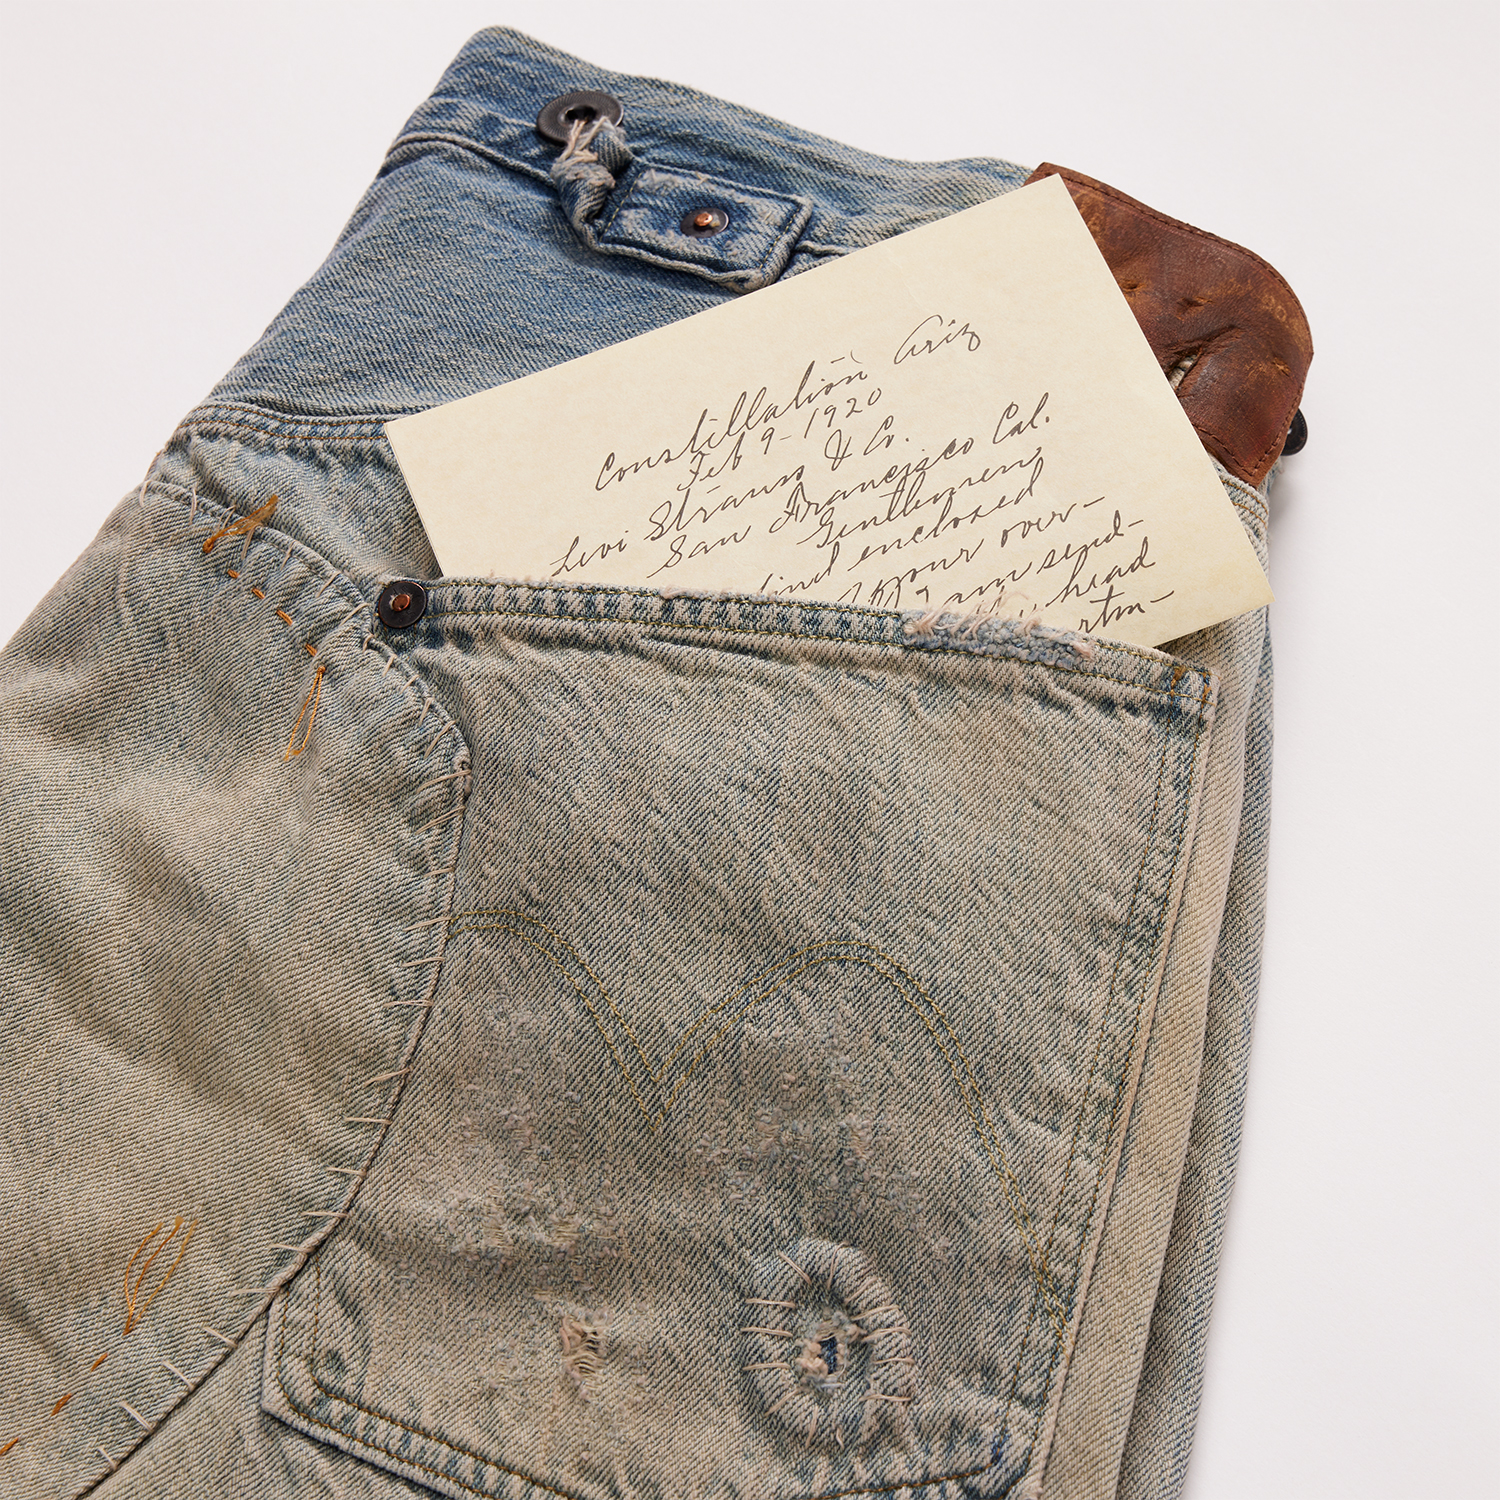 Levi's Homer Campbell 501 denim jeans made by Levi's Vintage Clothing